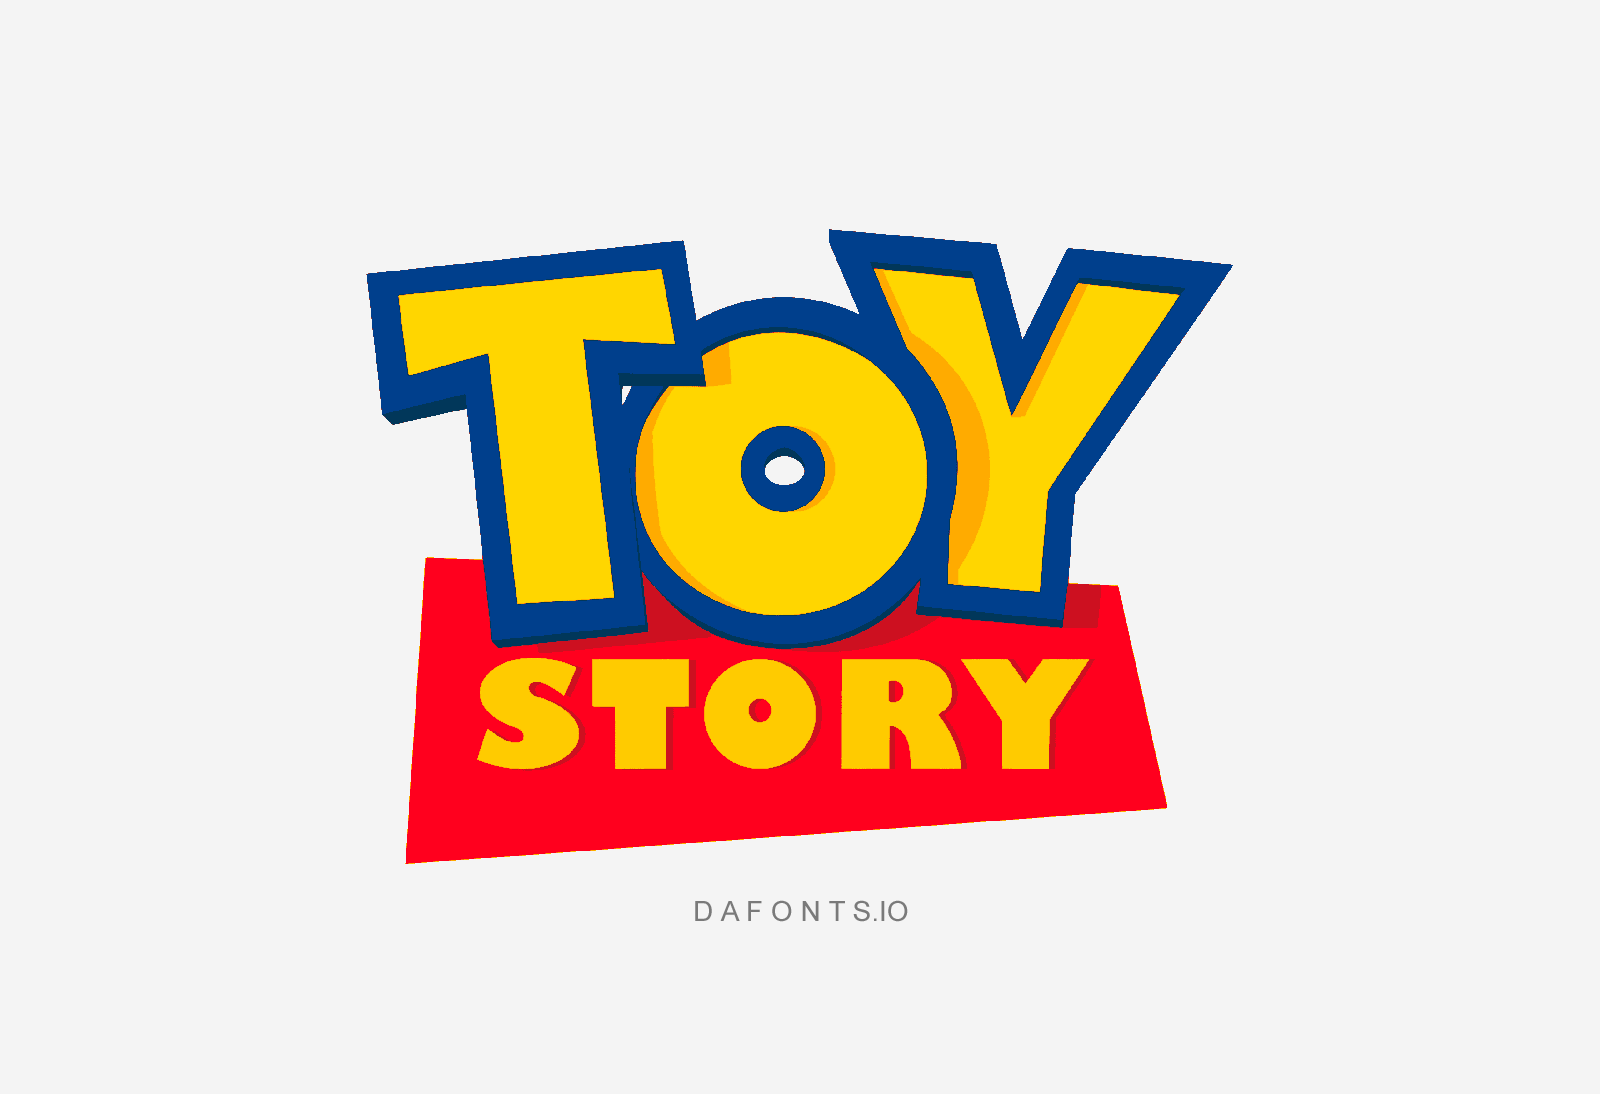 Toy Story Font